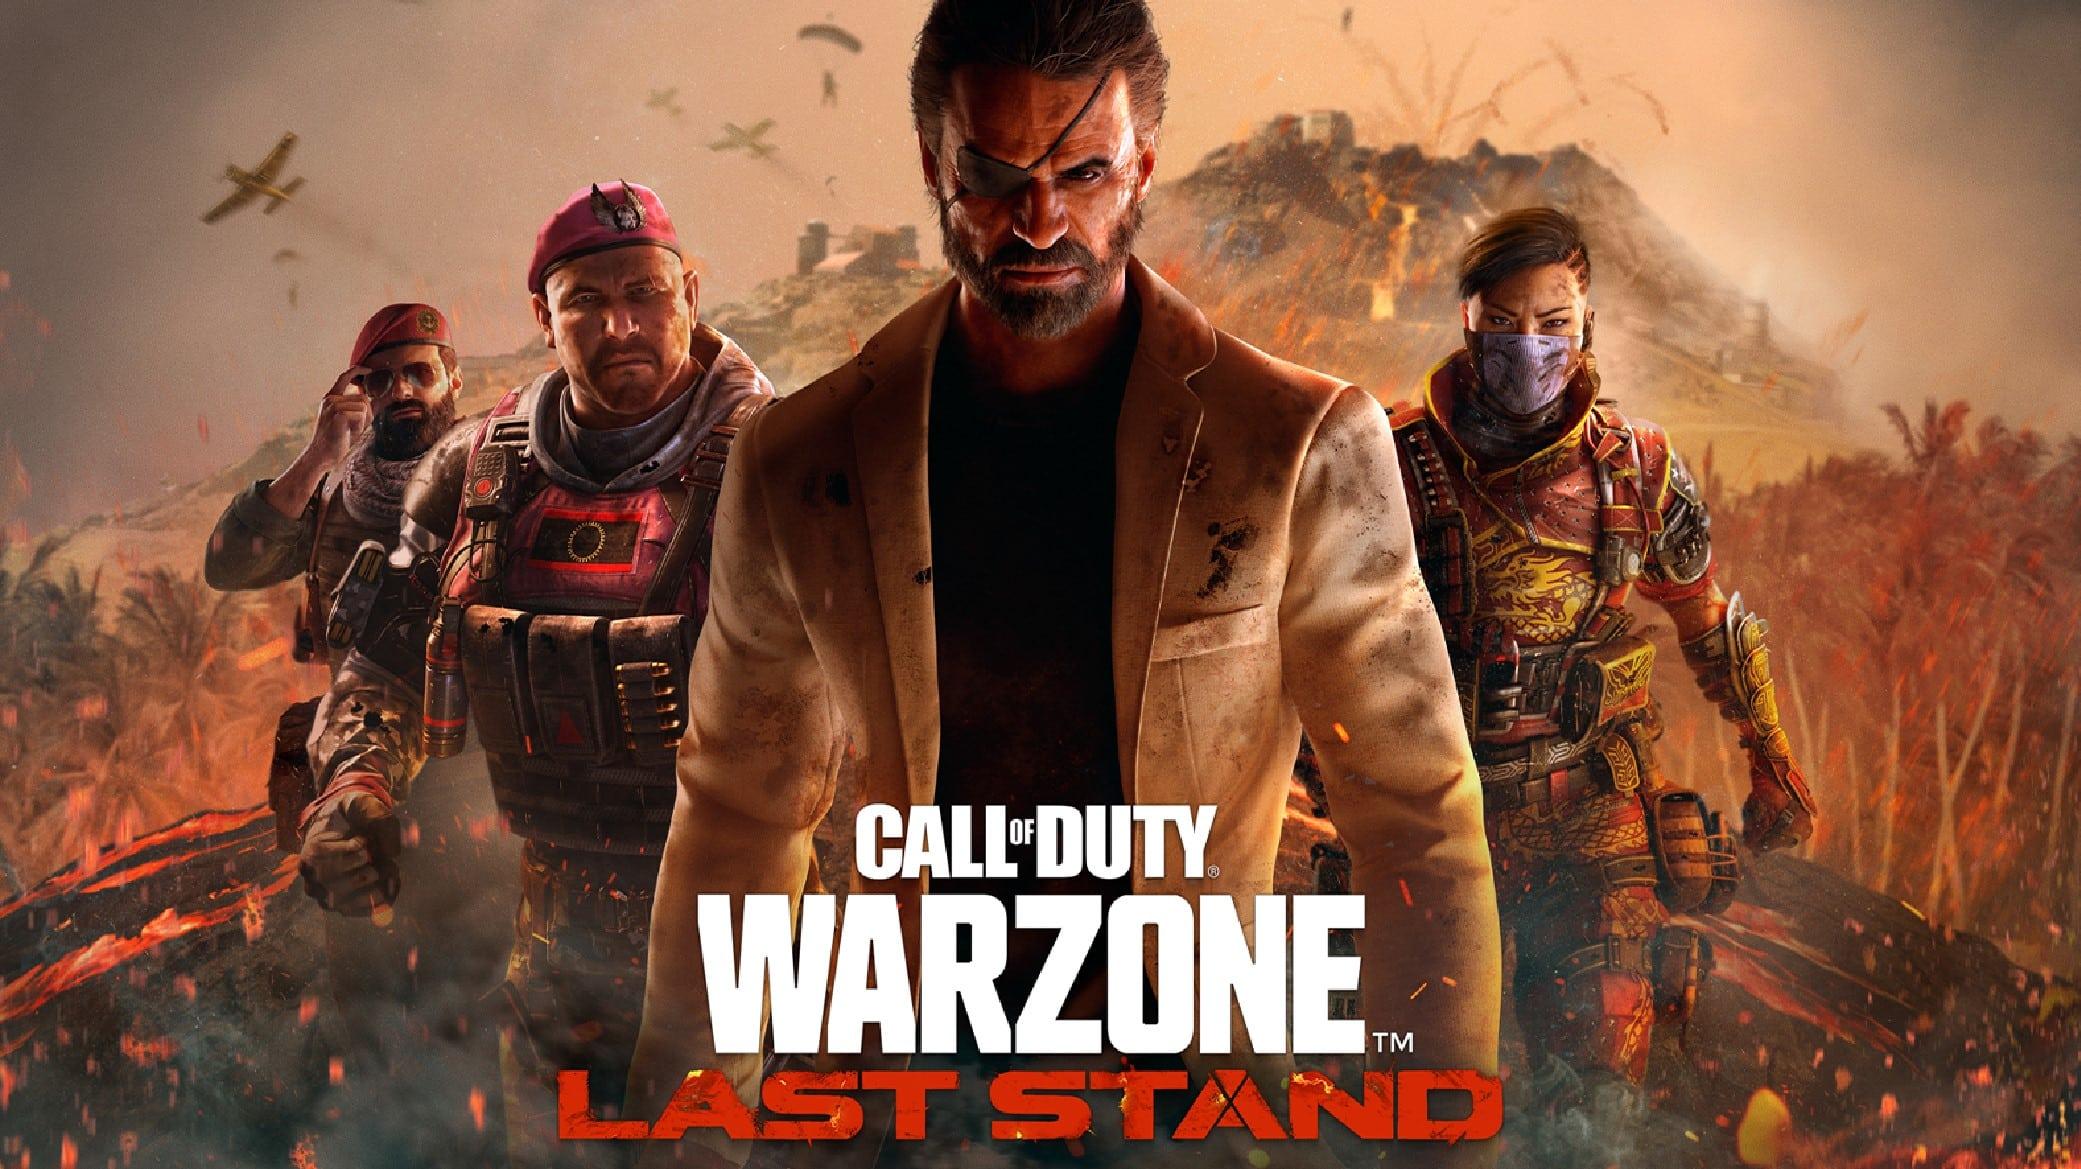 COD Warzone - Latest News, Updates & Videos on Call of Duty Warzone